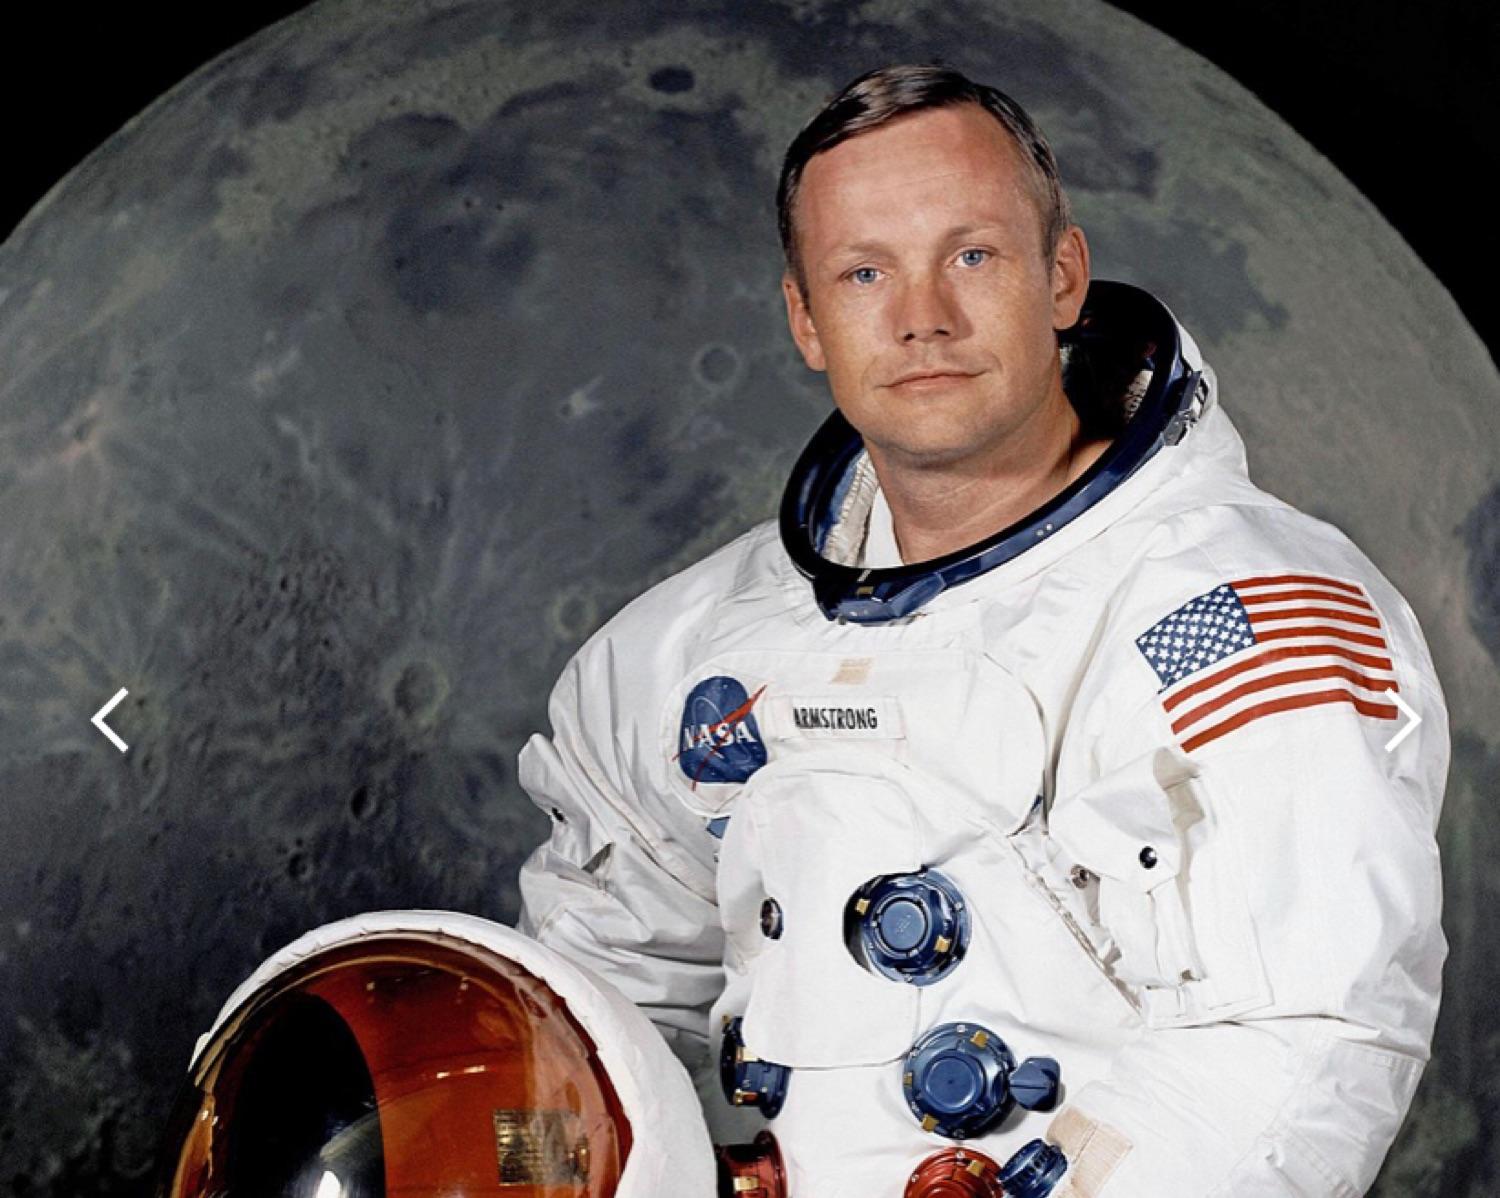 NEIL ARMSTRONG